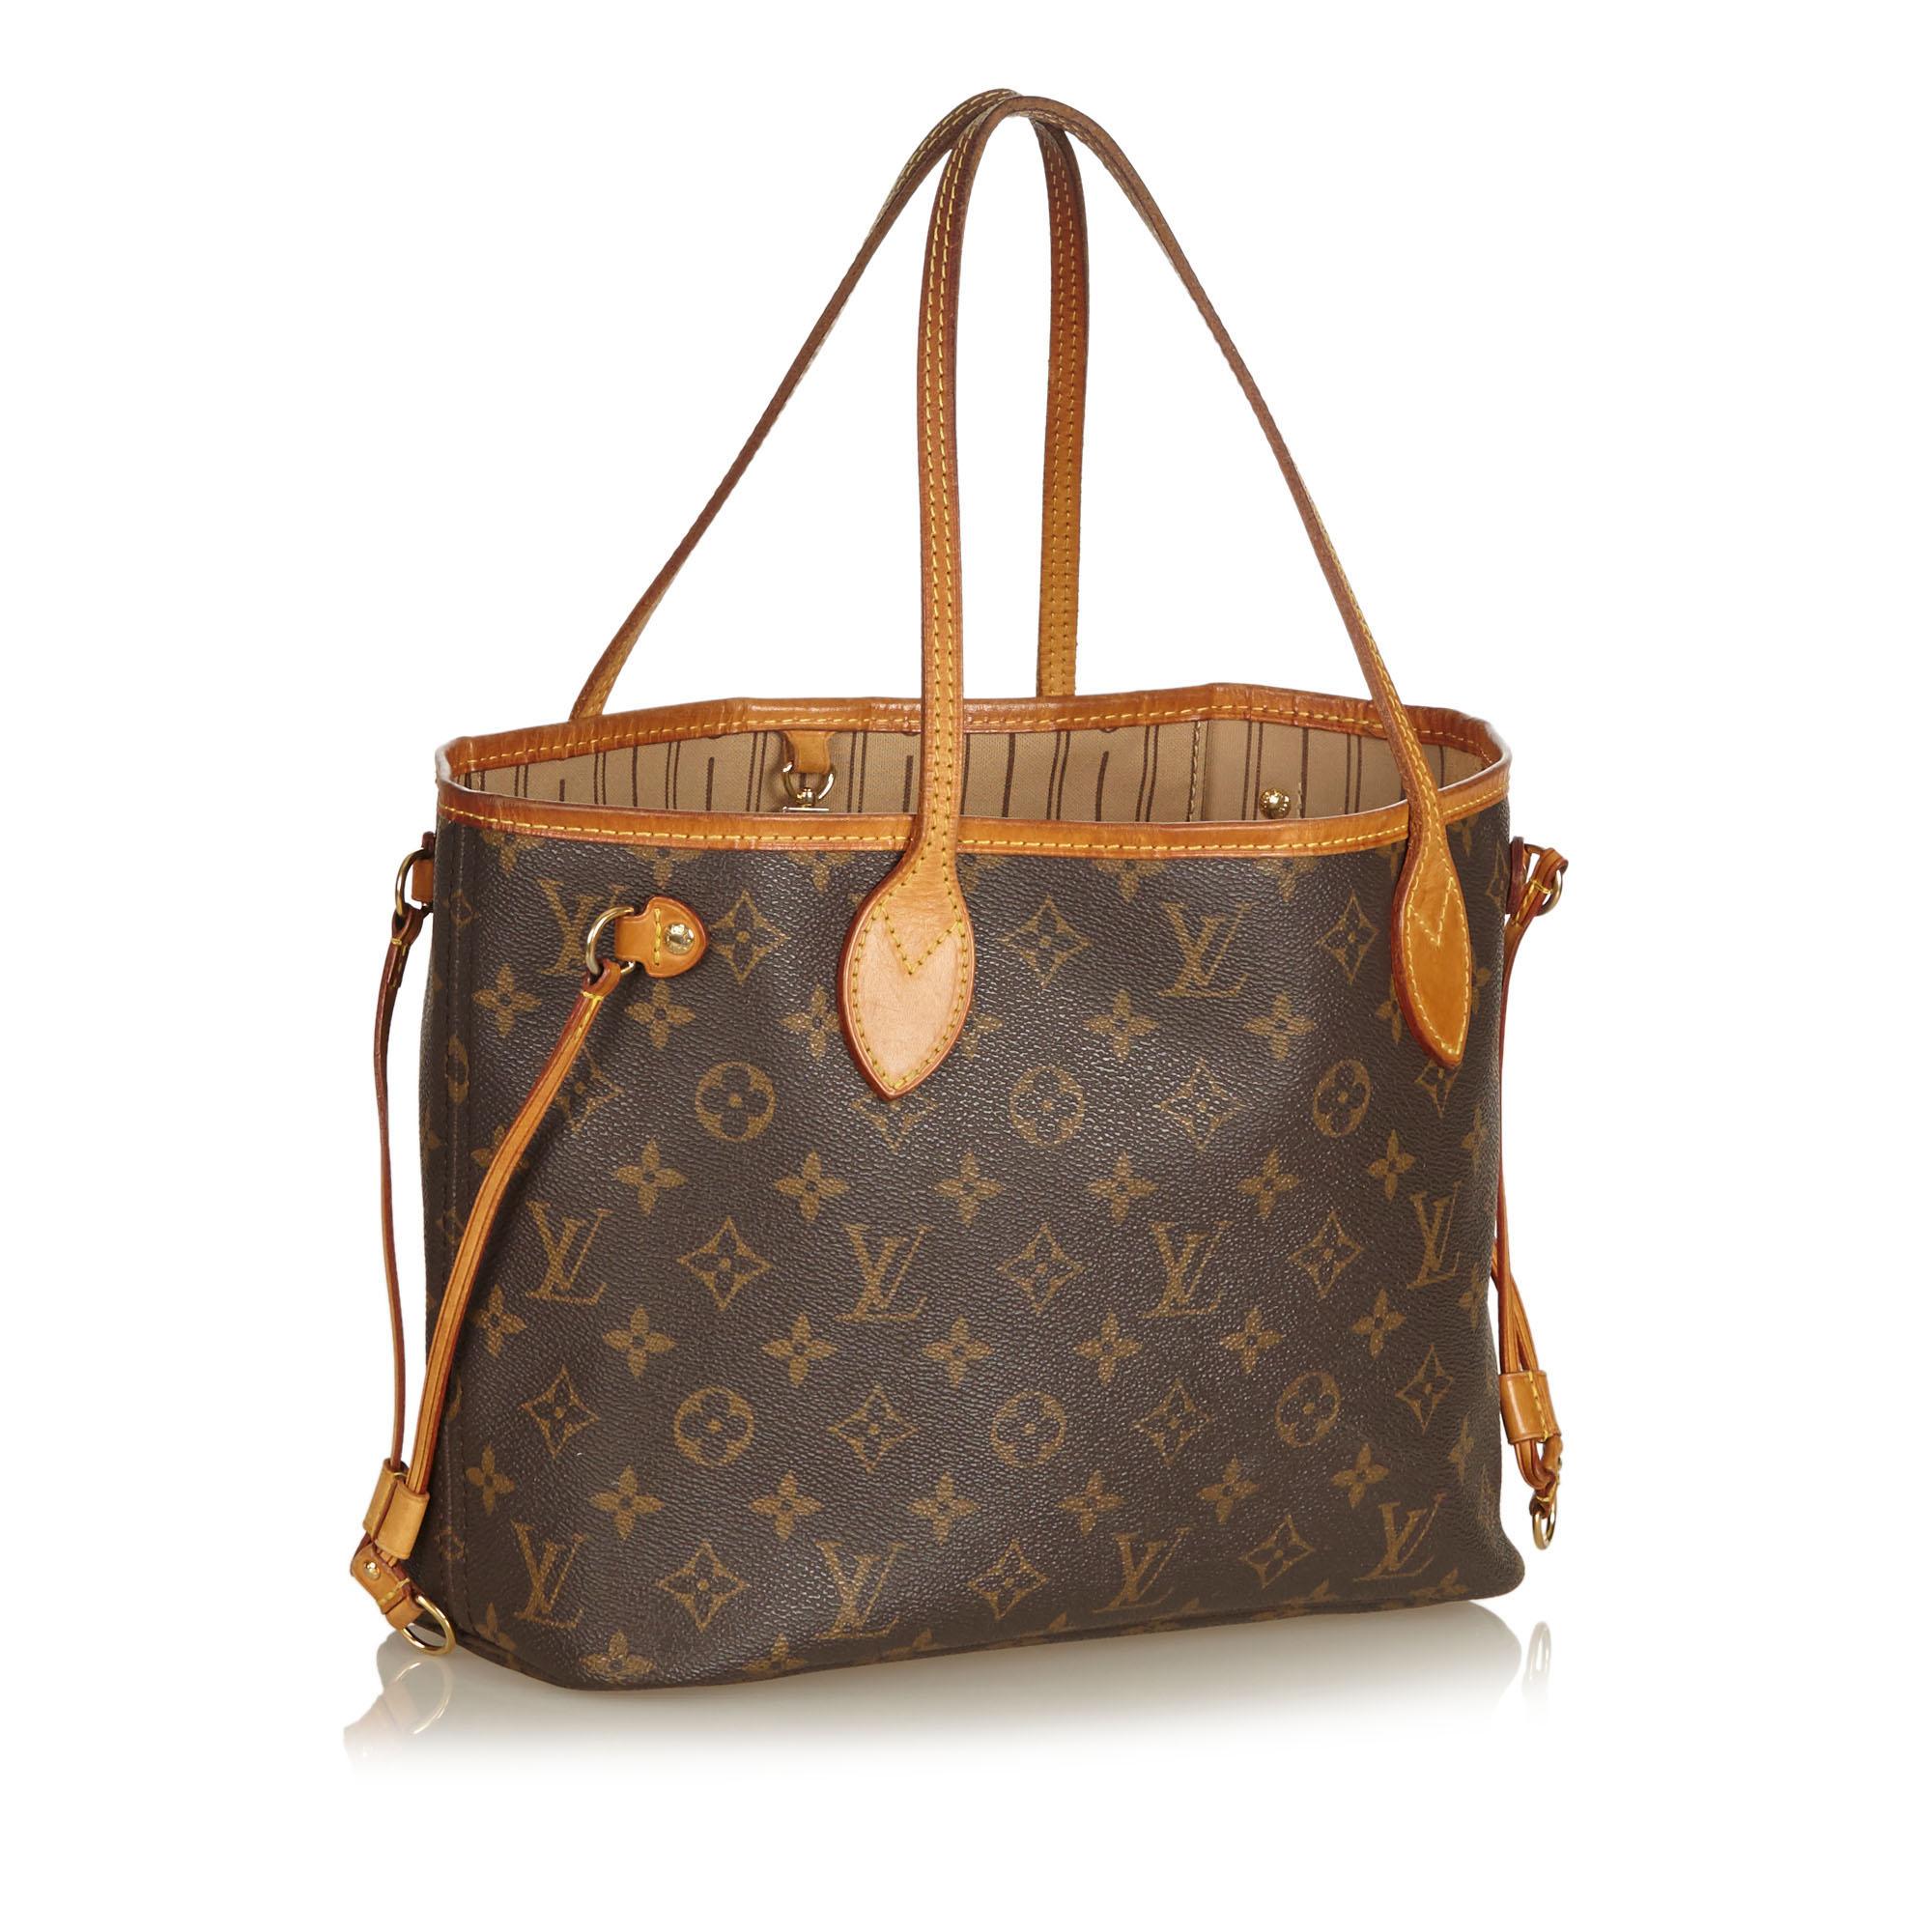 The Neverfull PM features a monogram canvas body, leather handles, a top lobster claw clasp closure, and an interior zip pocket.

It carries a B condition rating.

Dimensions: 
Length 22.00 cm
Width 29.00 cm
Depth 13.00 cm
Shoulder Drop 17.00